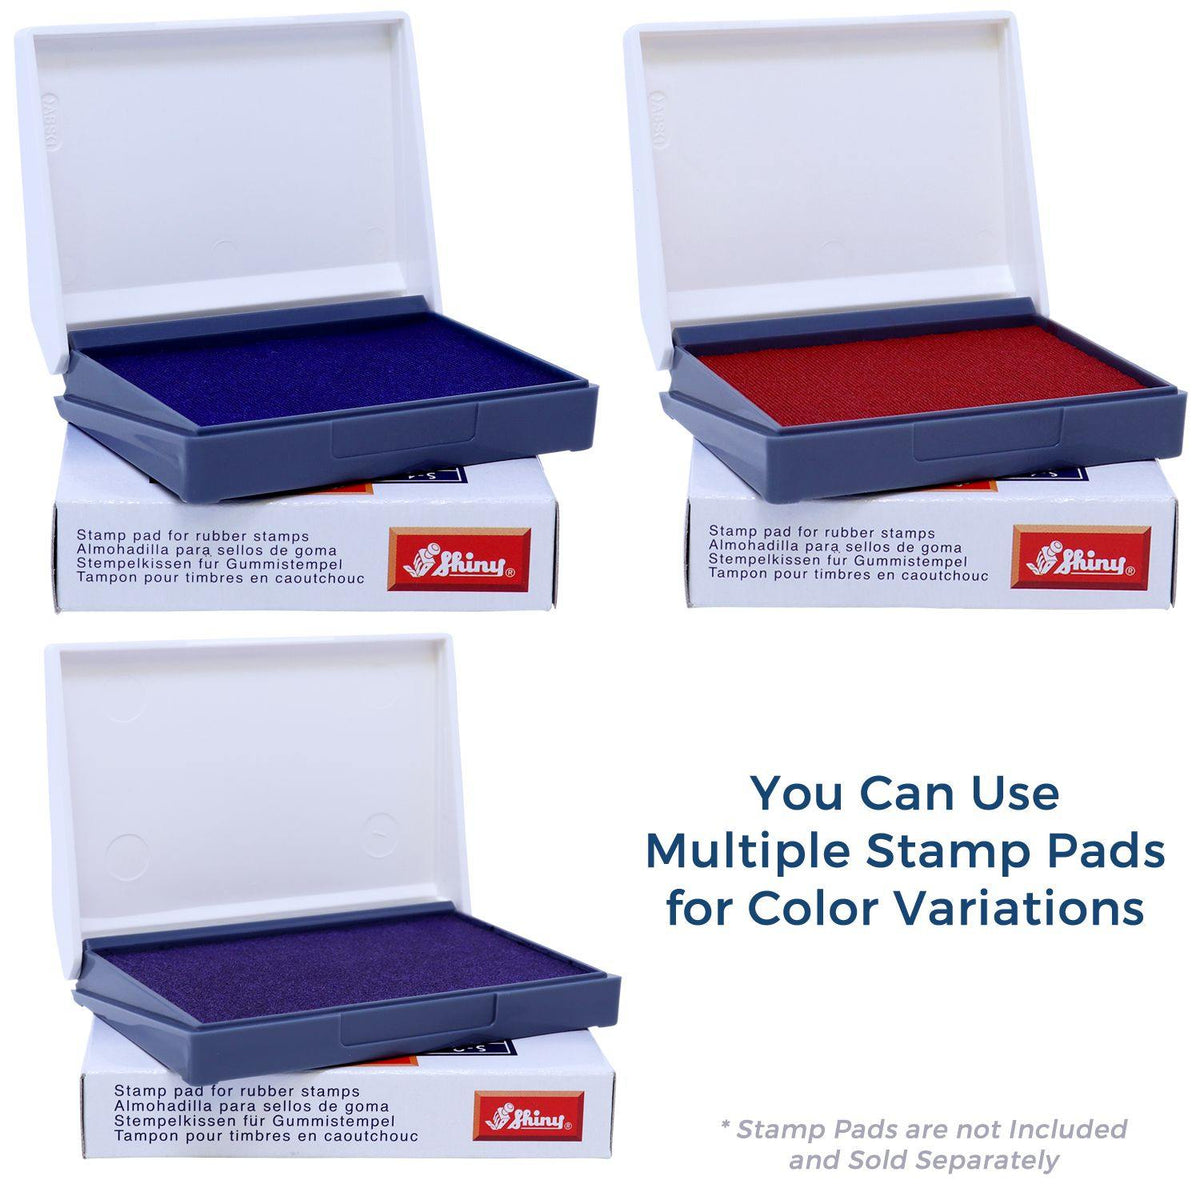 Stamp Pads for Large Notice Of Action Rubber Stamp Available